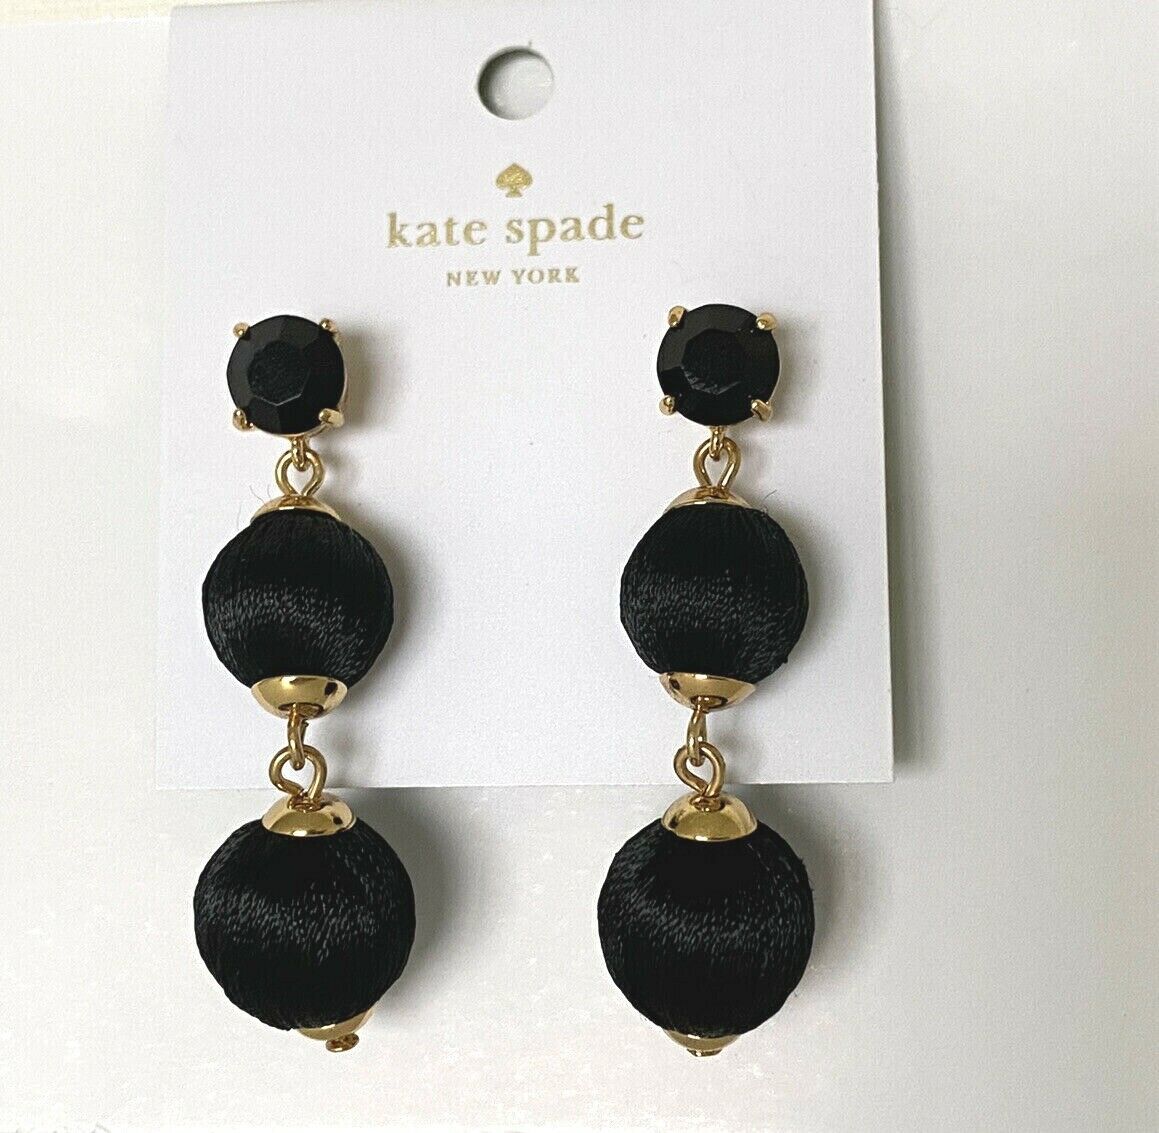 Primary image for New Kate Spade New York Sumac Linear Graduated Ball Earrings Black